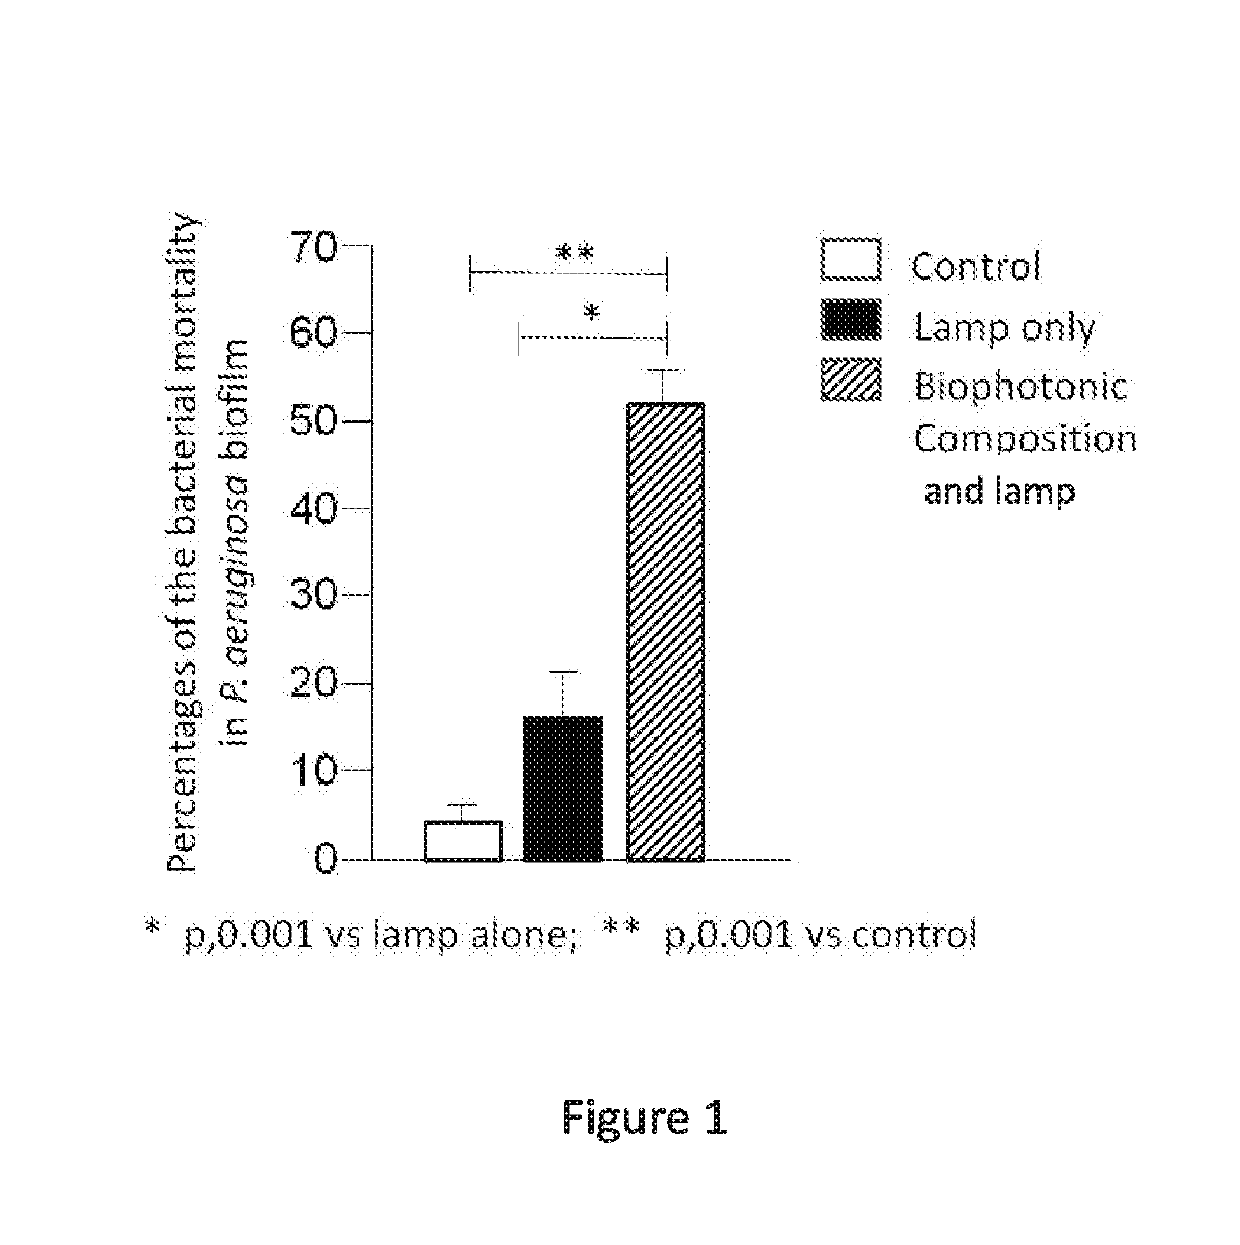 Biophotonic compositions, methods, and kits for inhibiting and disrupting biofilms